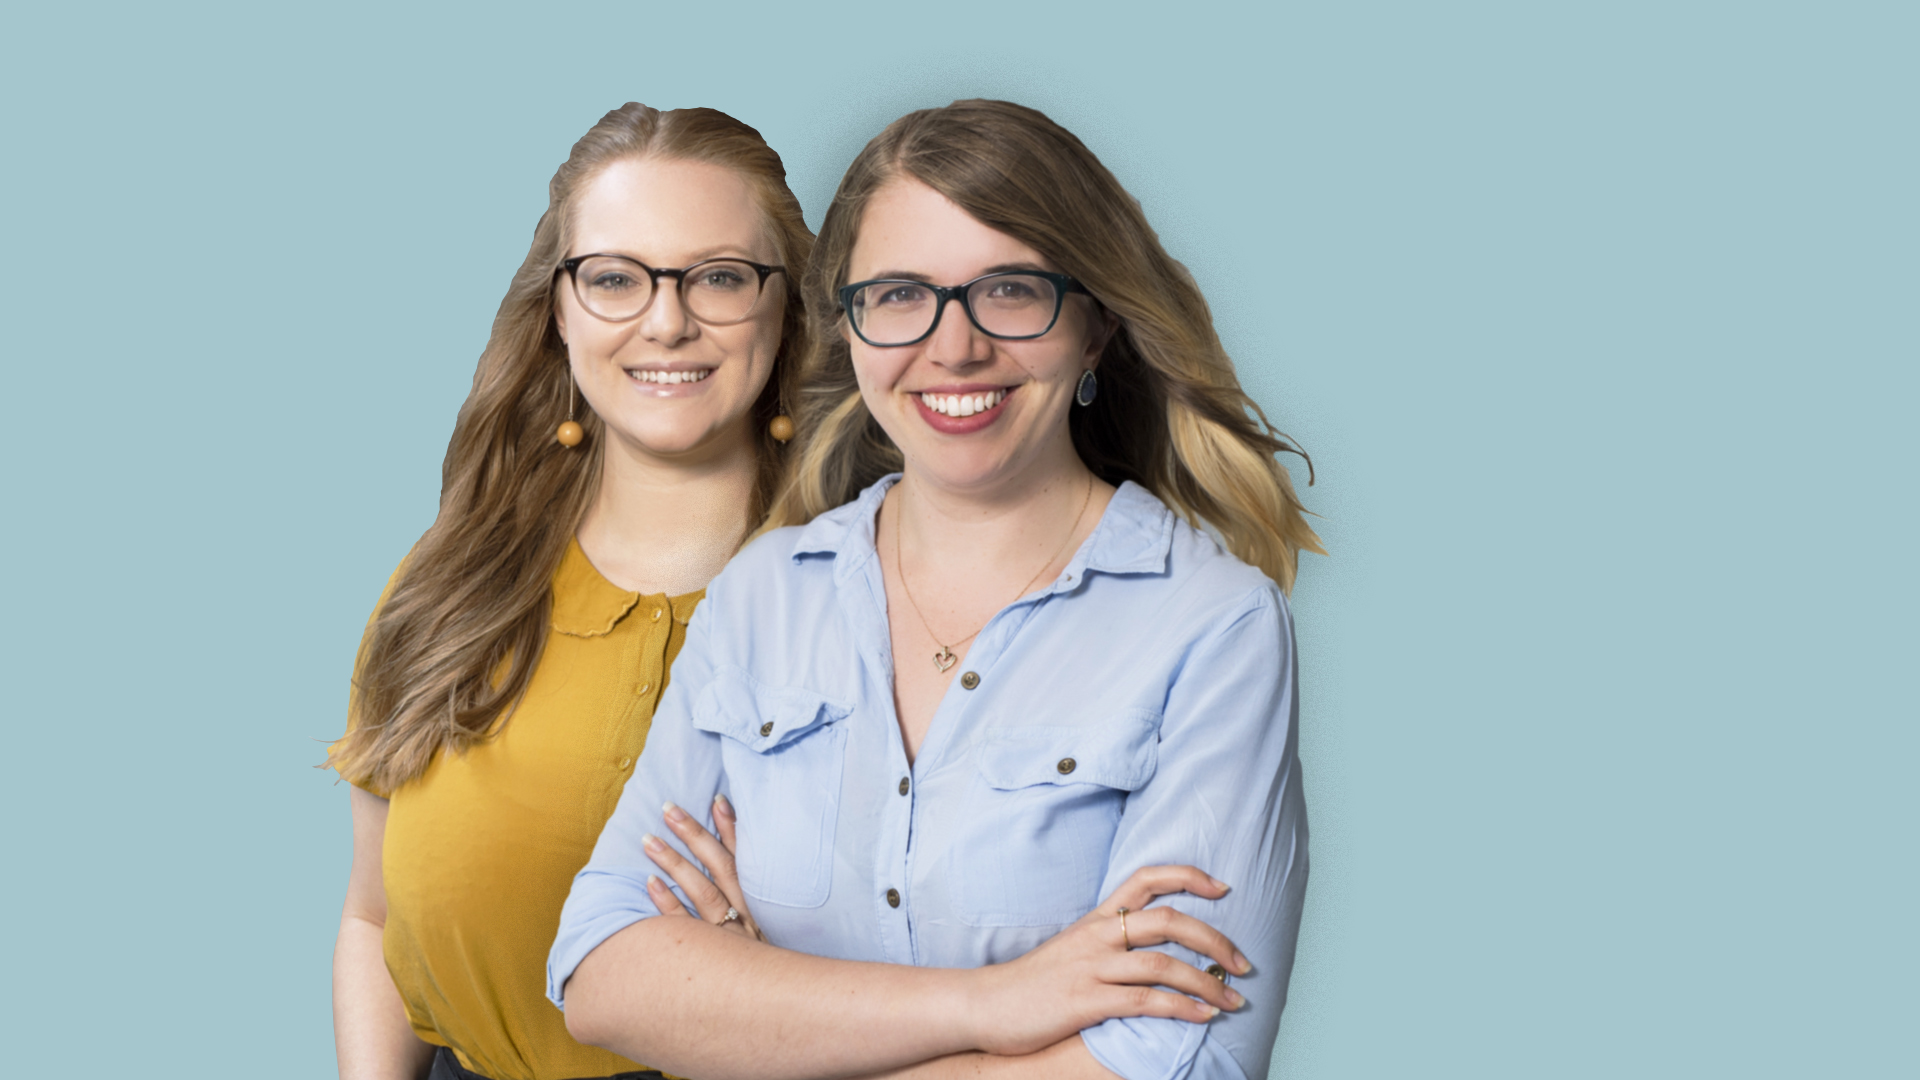 Emily Coates and Sarah-Jane Dabarera have been promoted to Senior Consultants.